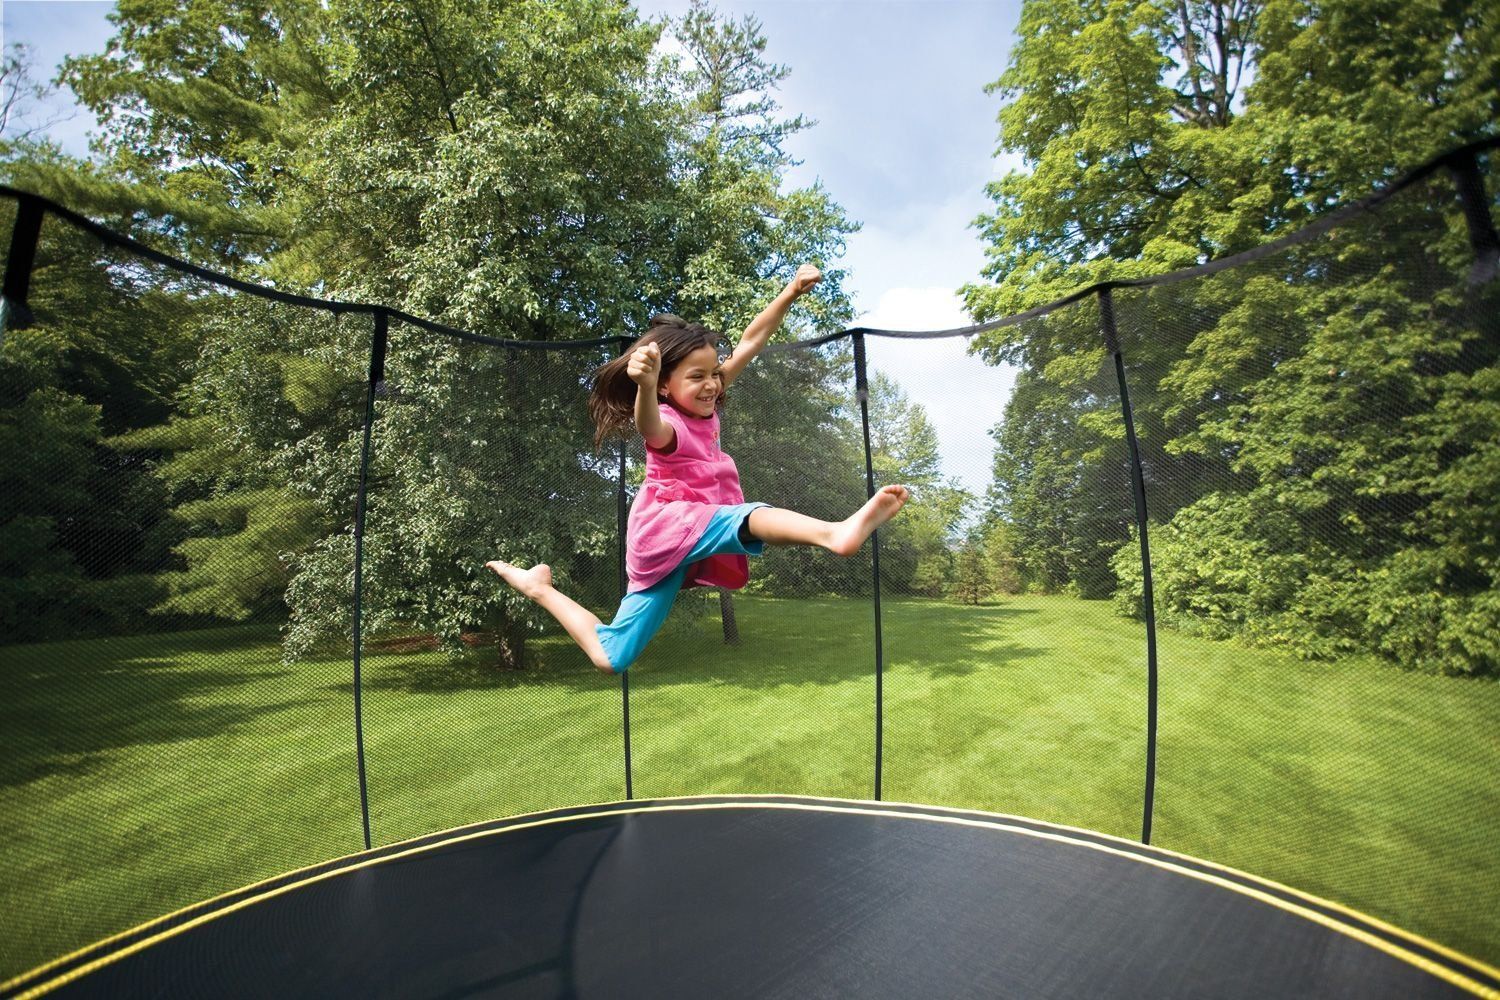 Best trampolines for kids and adults in 2020